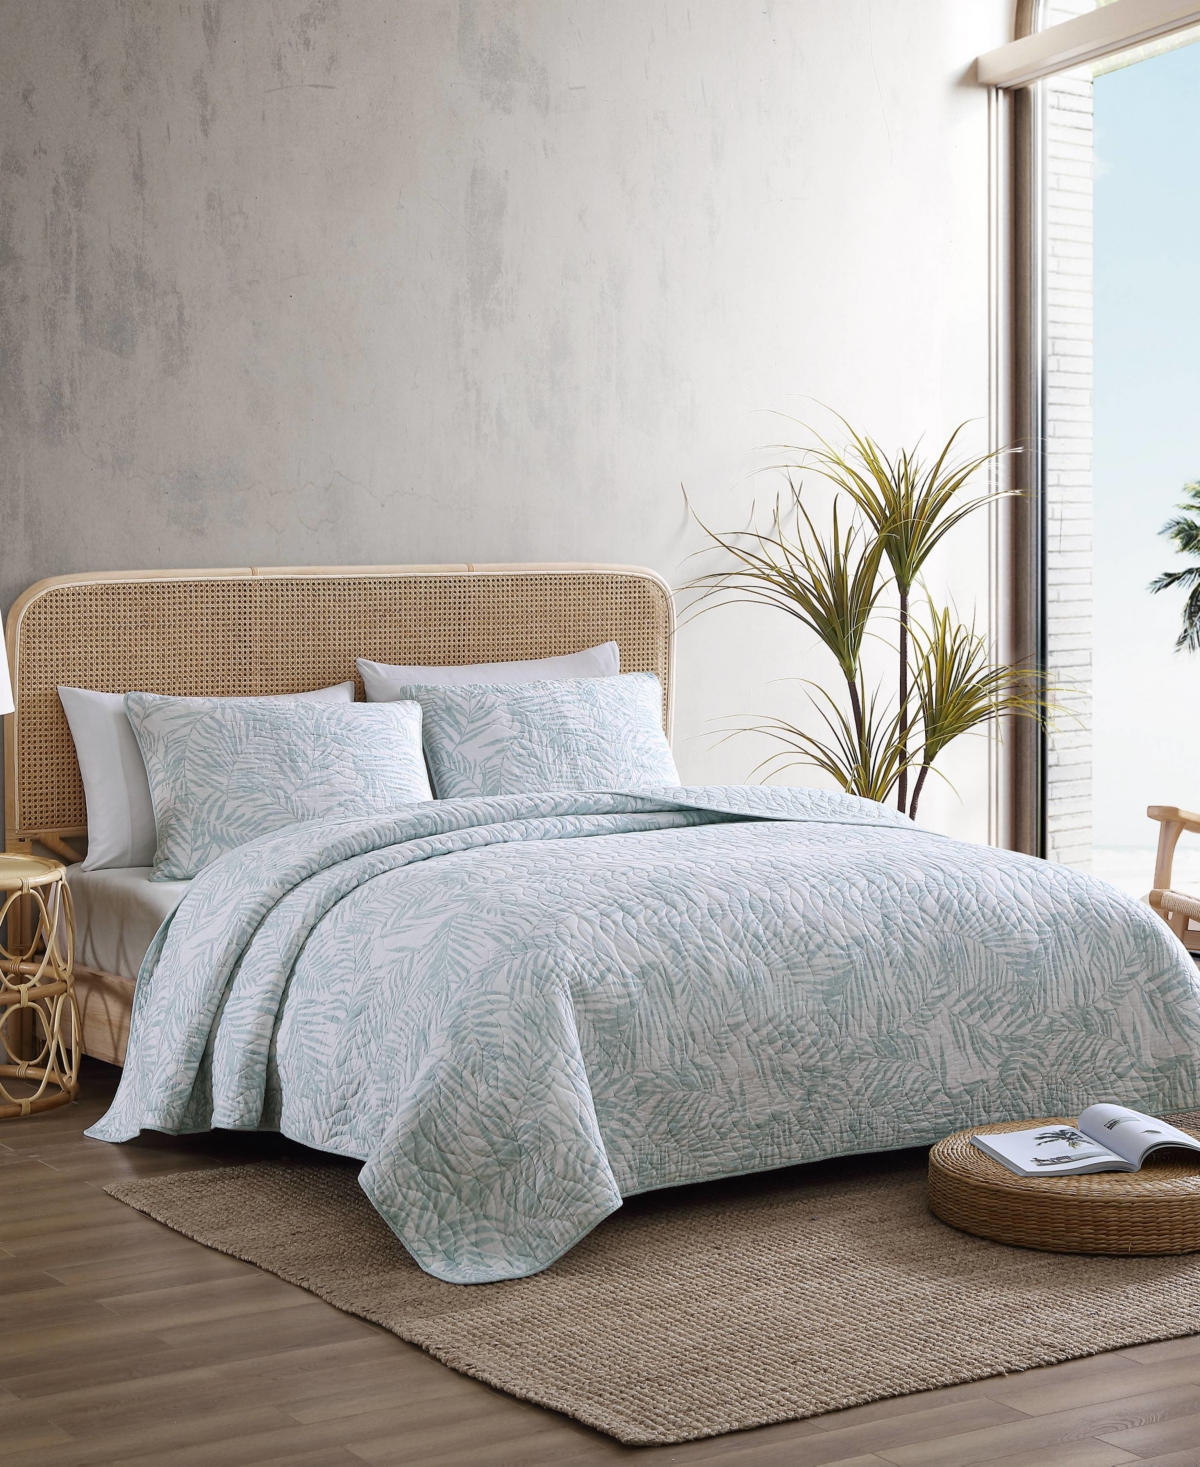 TOMMY BAHAMA HOME TOMMY BAHAMA PALMDAY COTTON REVERSIBLE 2 PIECE QUILT SET, TWIN BEDDING